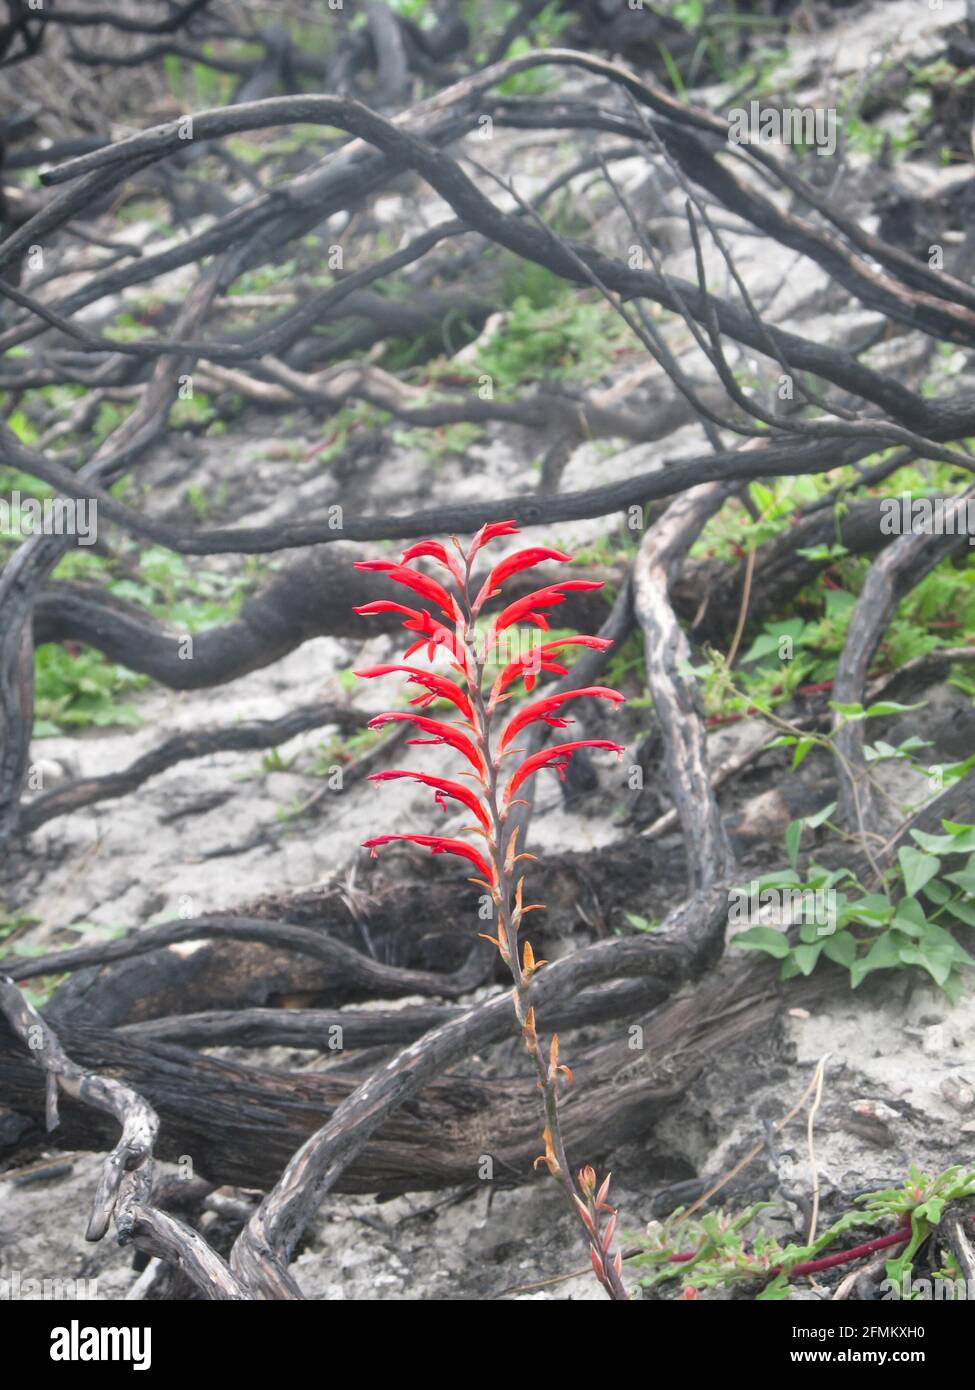 A scarlet Outeniqua snake flowers, blooming after a bushfire, surrounded by twisted burned out branches along the Garden Route coastline Stock Photo